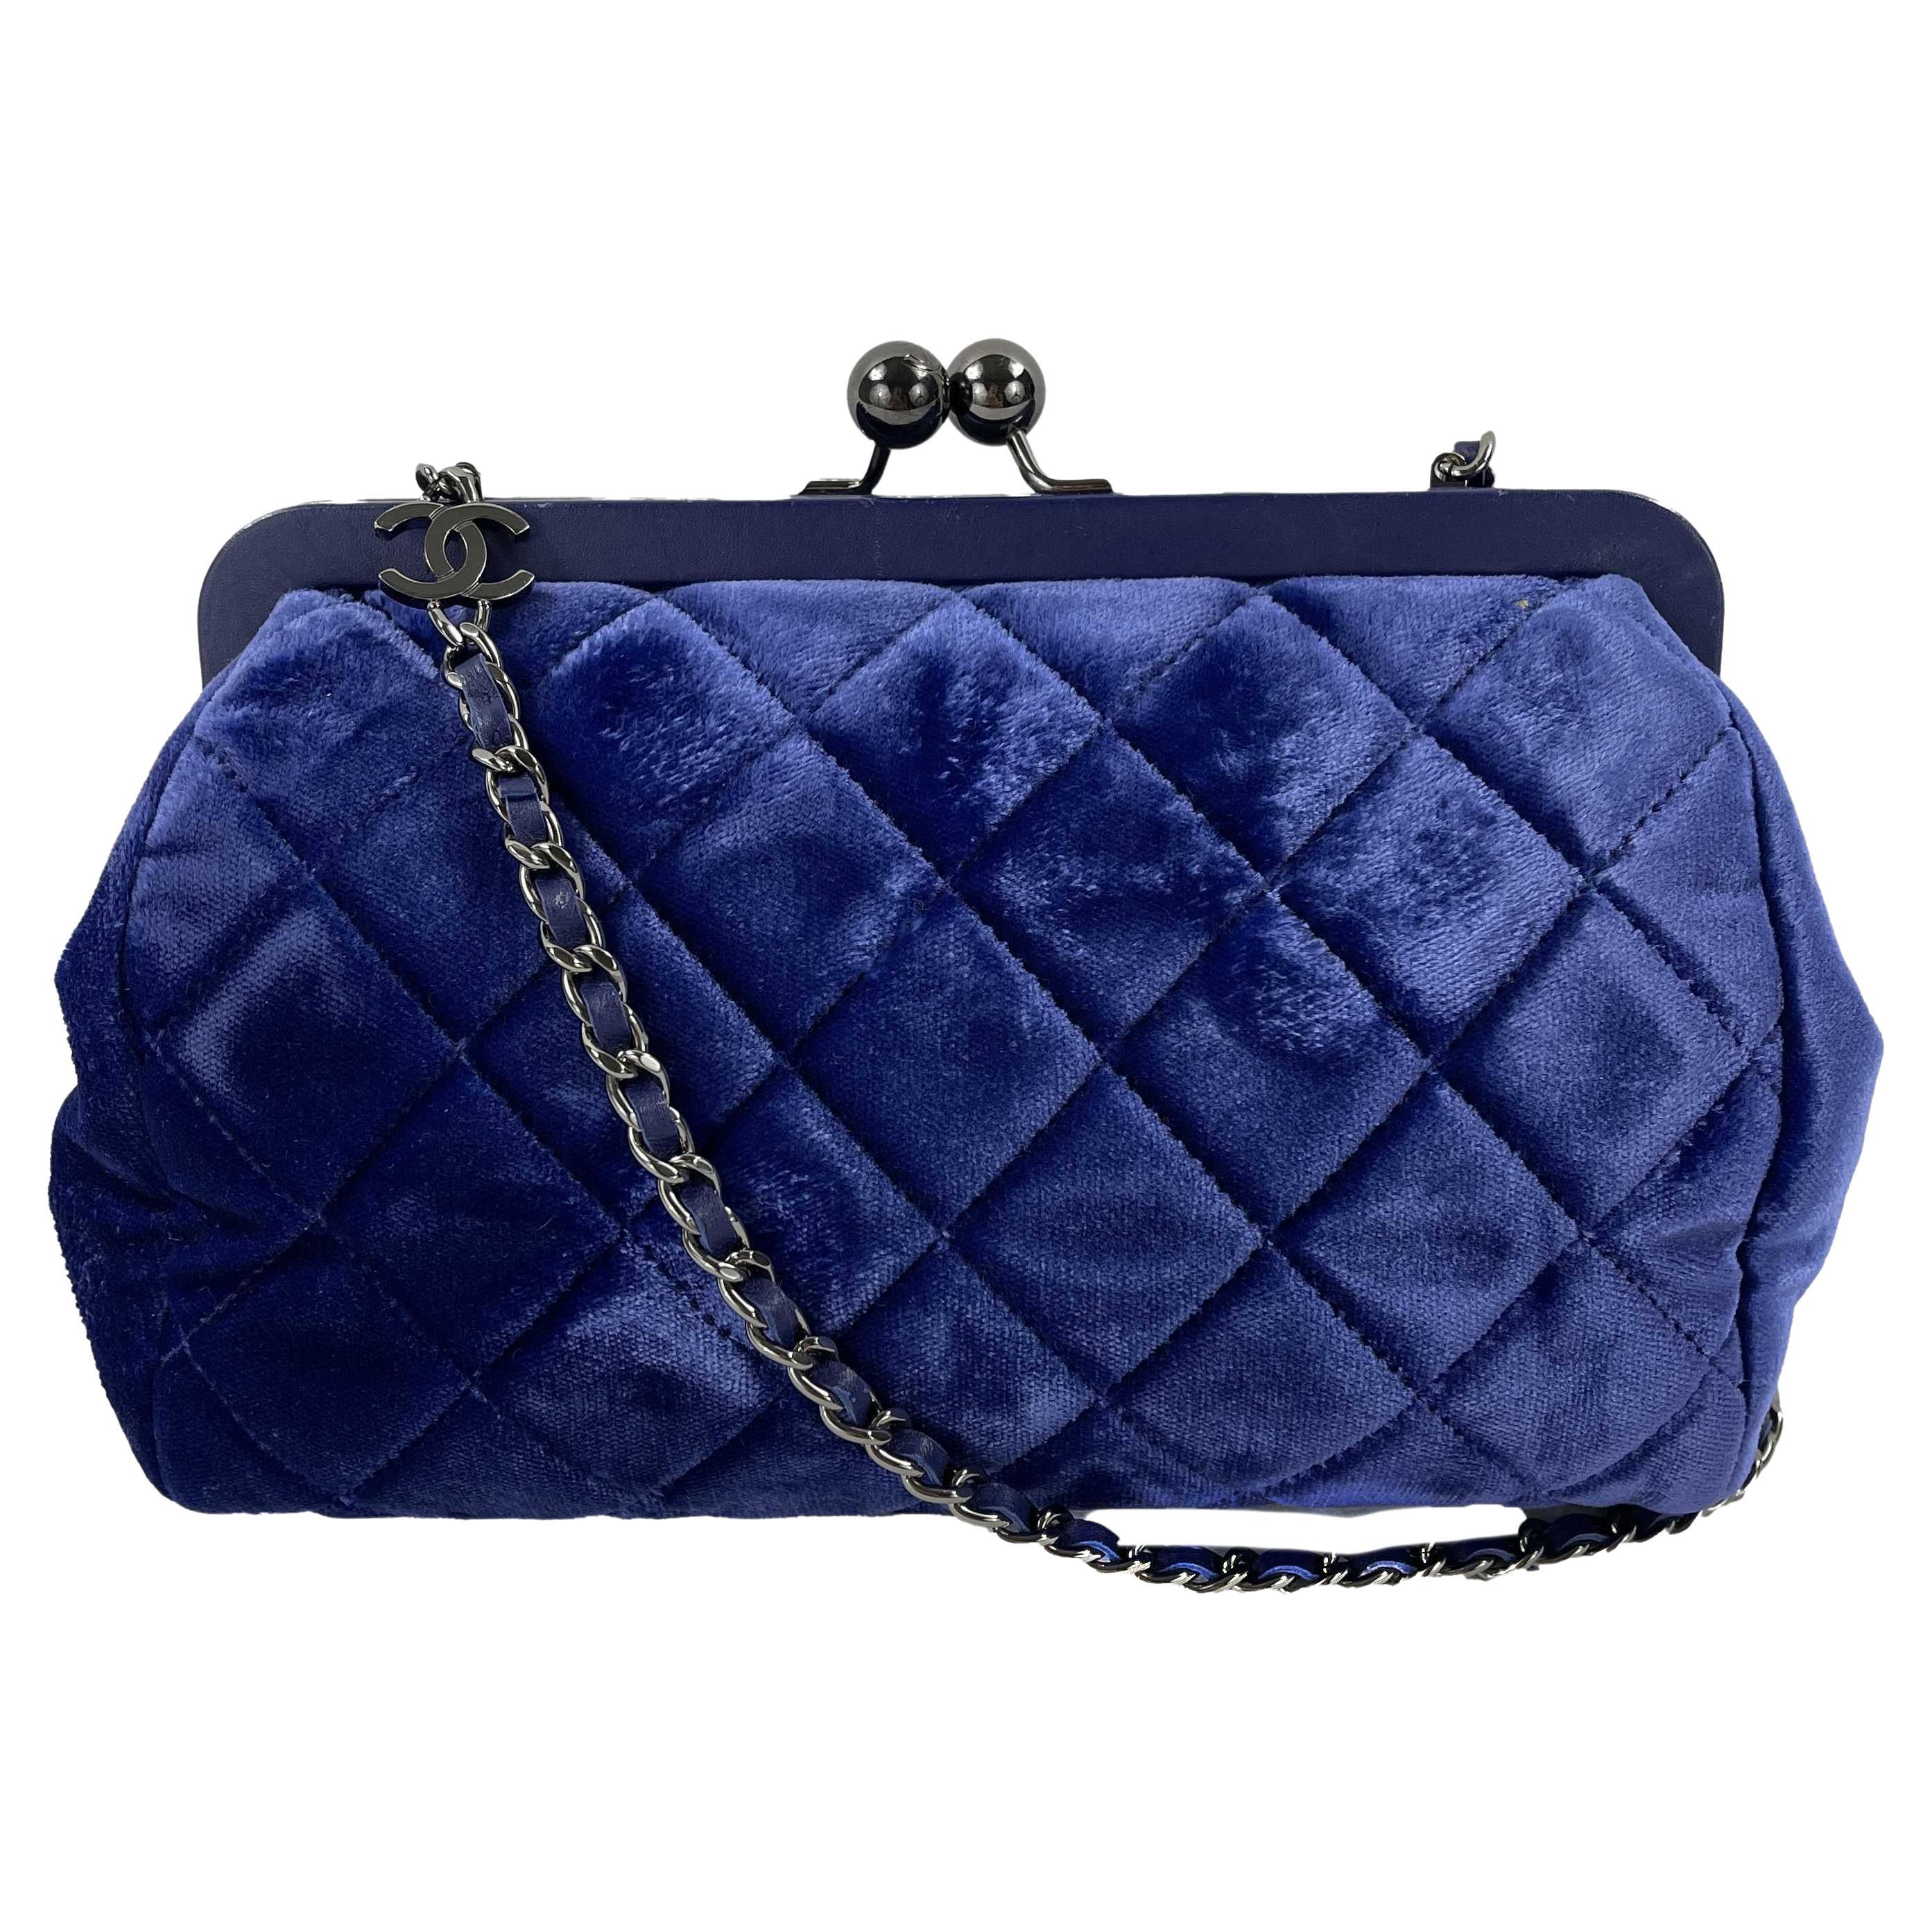 CHANEL- CC Blue Kiss-lock Velvet Quilted Stitched Clutch / Crossbody